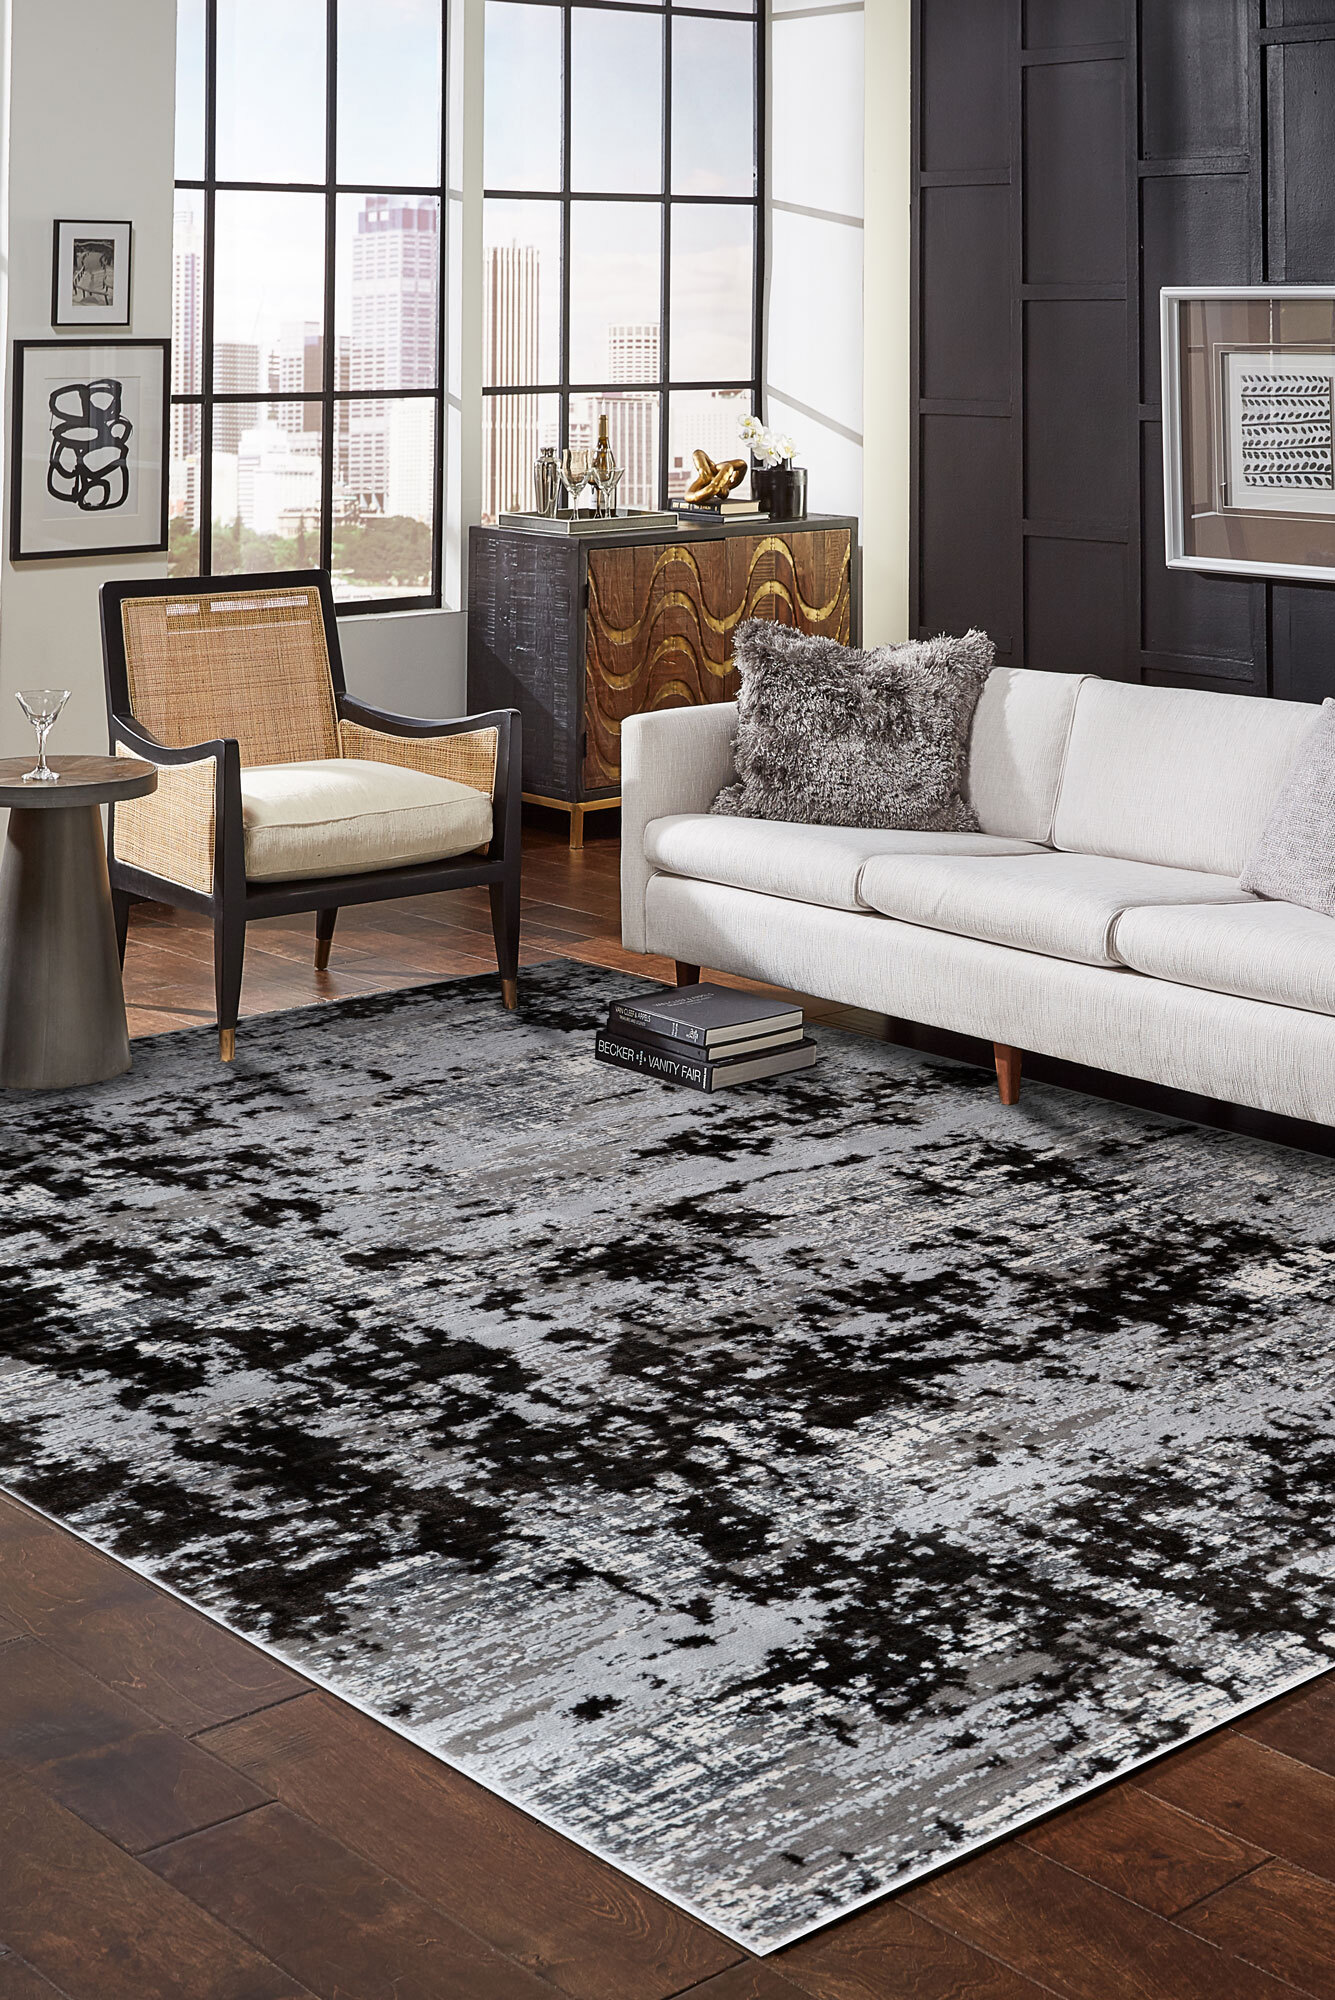 Billy Transitional Abstract Rug(Size 170 x 120cm)